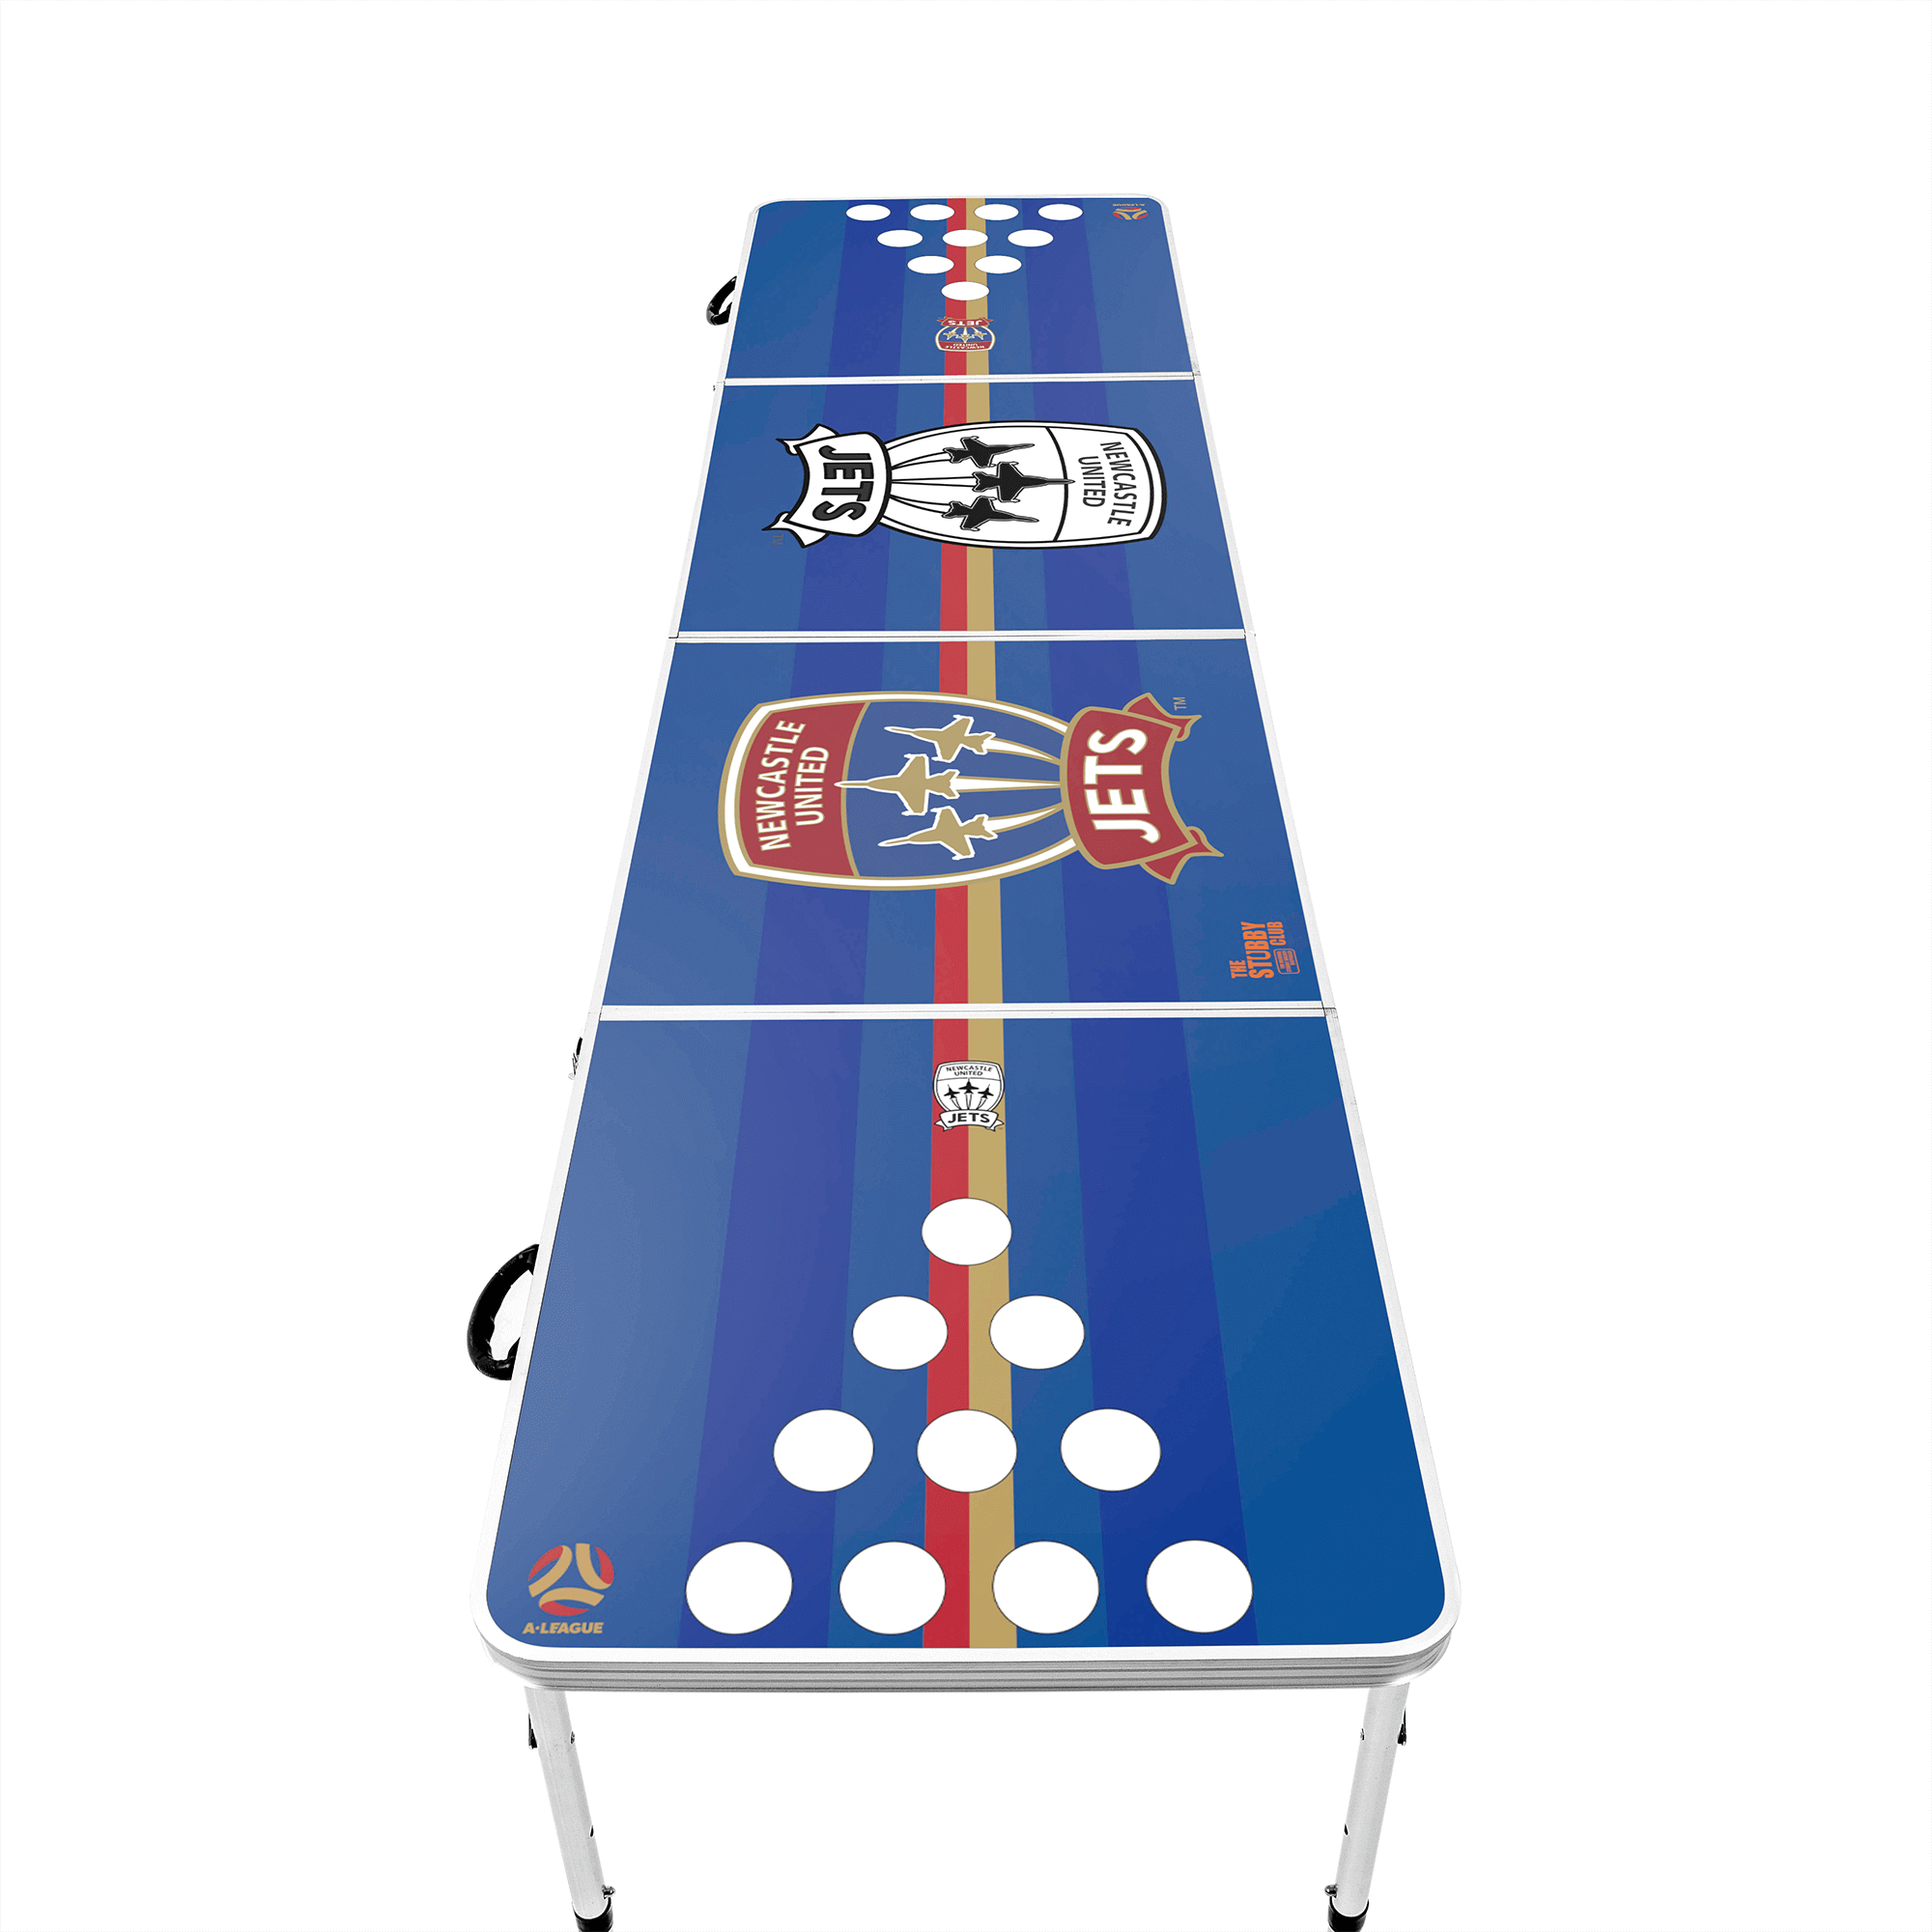 A-LEAGUE BEER PONG TABLE_NEW CASTLE JETS_STUBBY CLUB